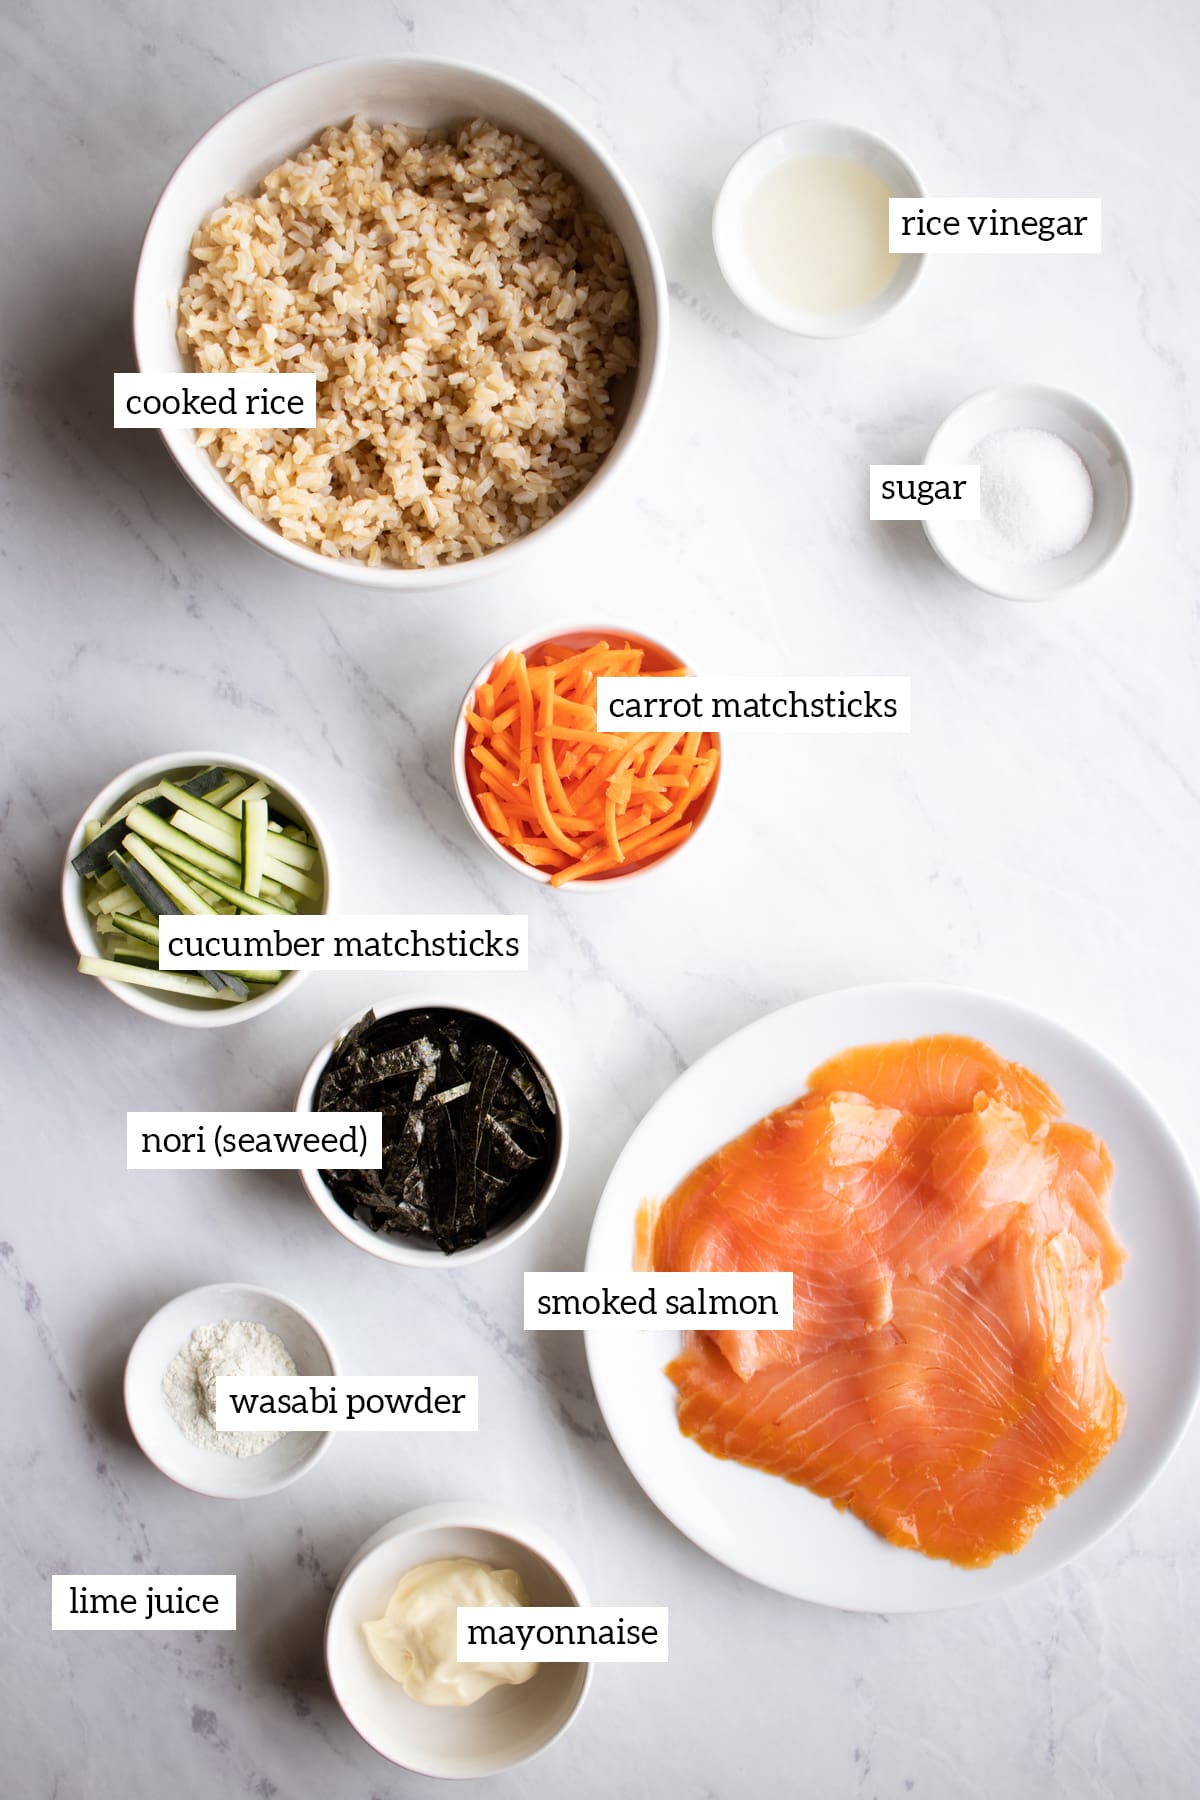 Ingredients for these low FODMAP sushi bowls are measured out into individual white dishes